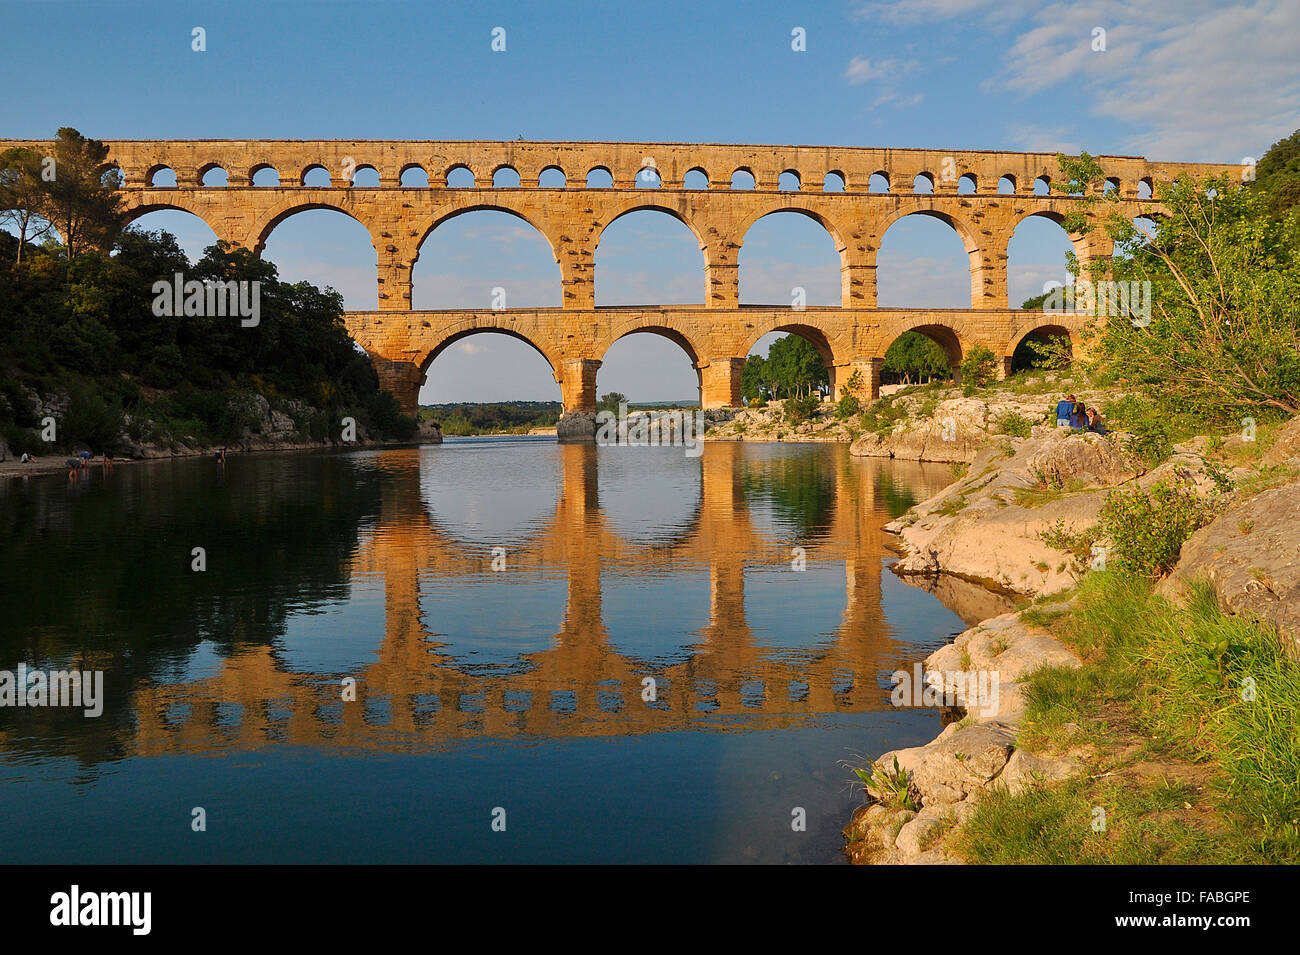 Roman aqueduct Pont du Gard reflected in the Gardon river, Remoulins, Provence, Southern France, France, Europe Stock Photo